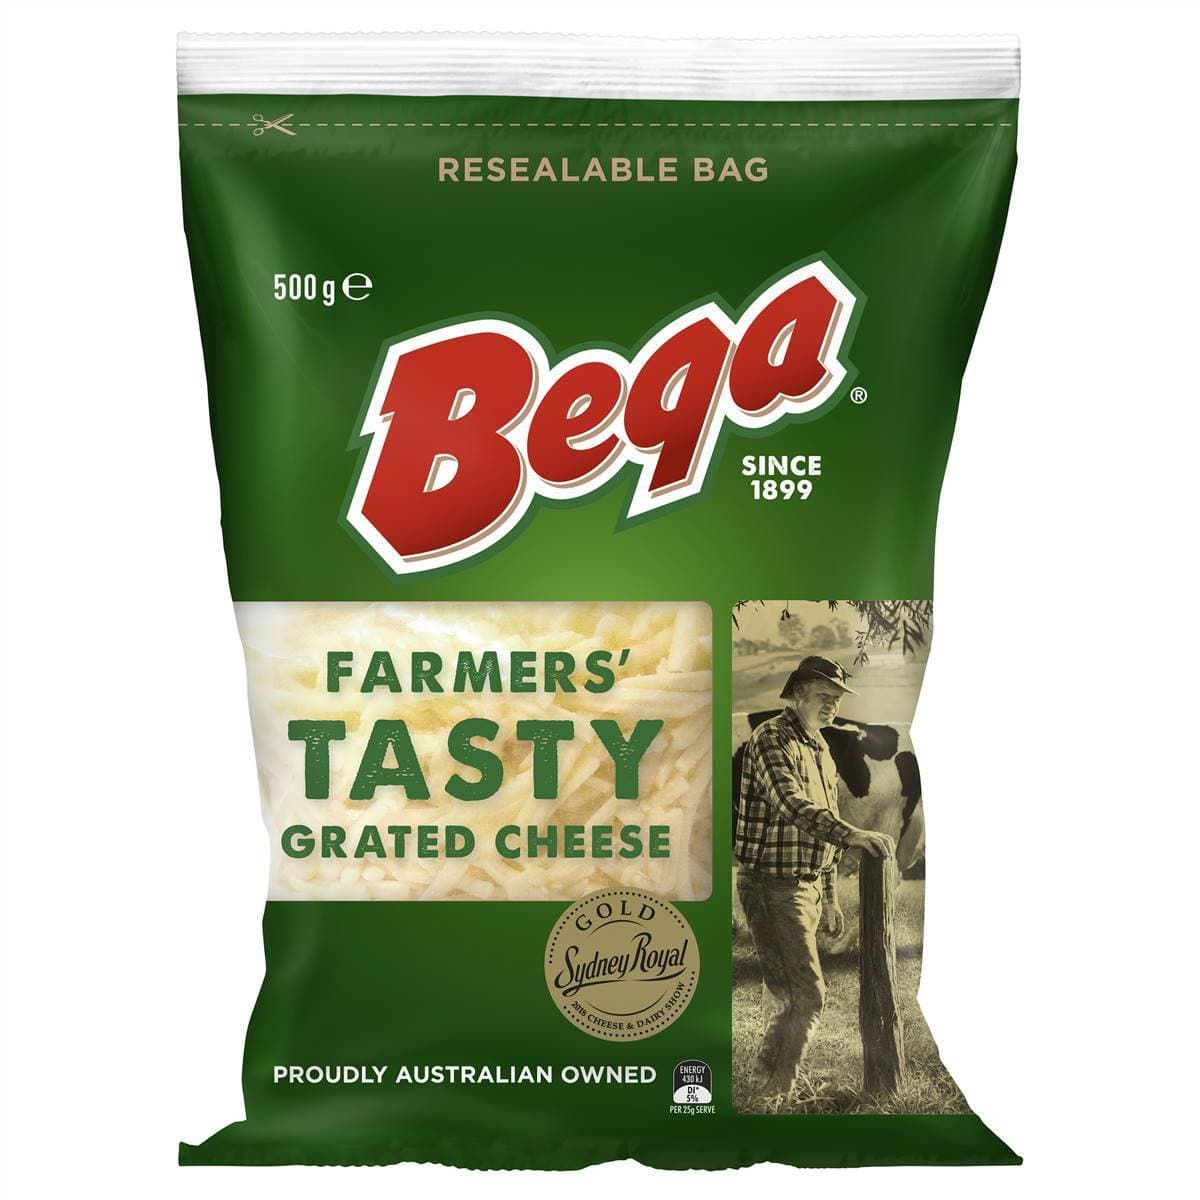 Bega Grated Cheese Tasty 500g